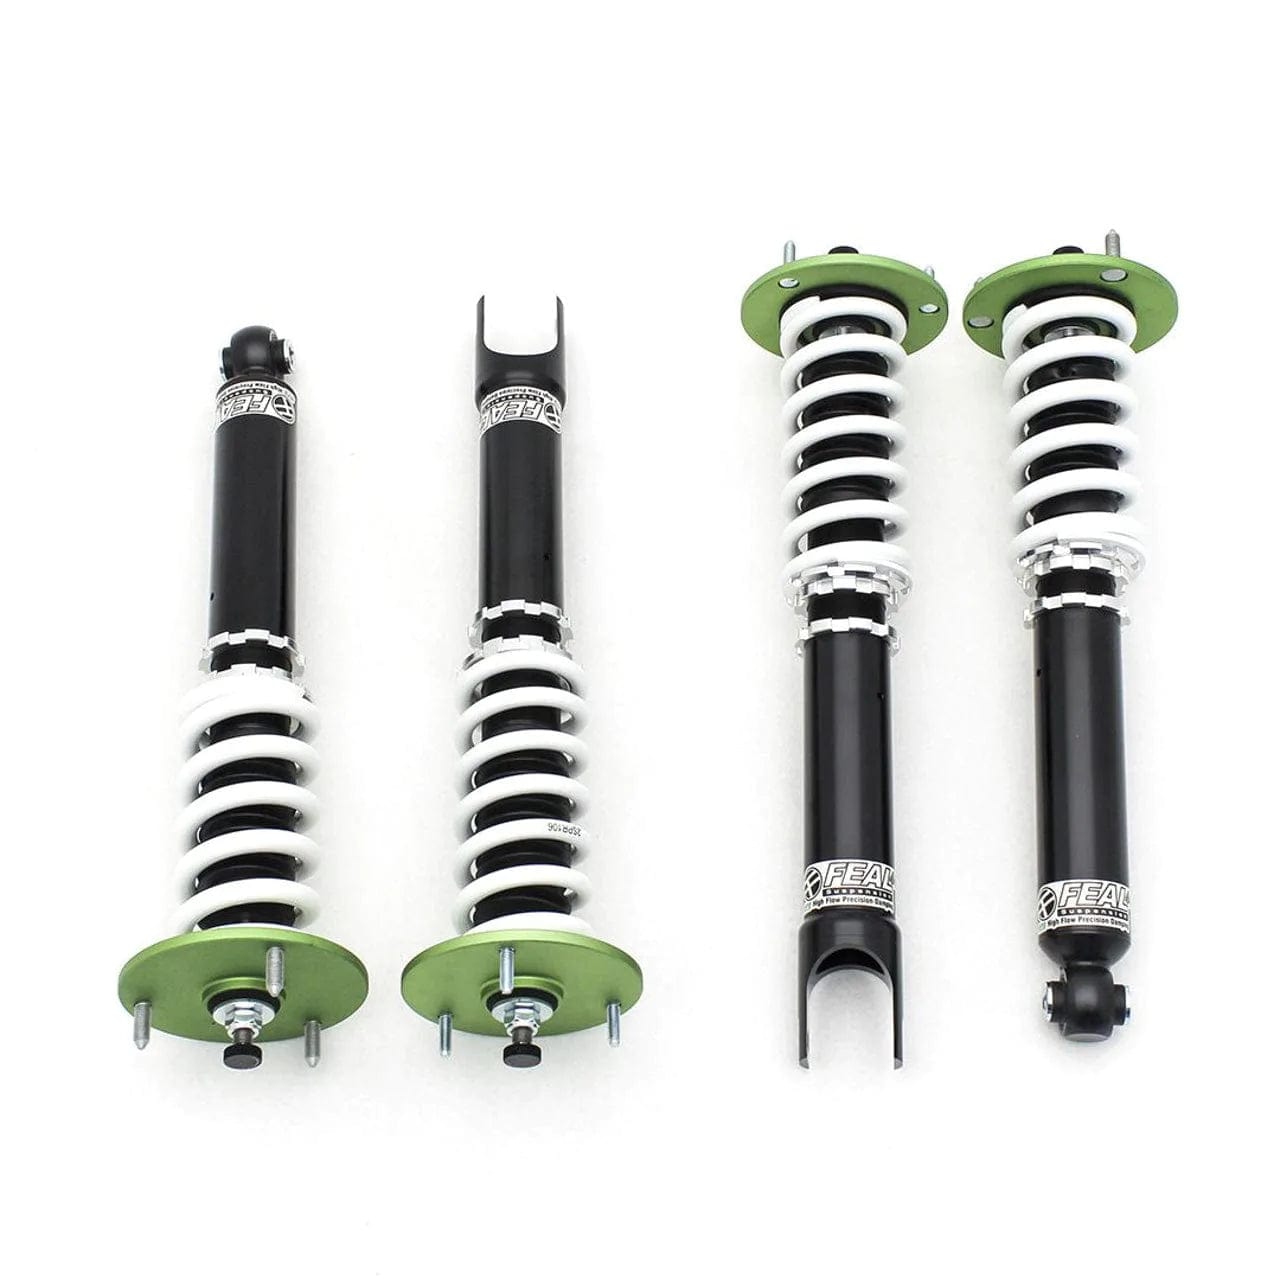 Feal 441 Heavy Front Coilovers - 1989-1994 Nissan 240SX (S13) 441NI-01H